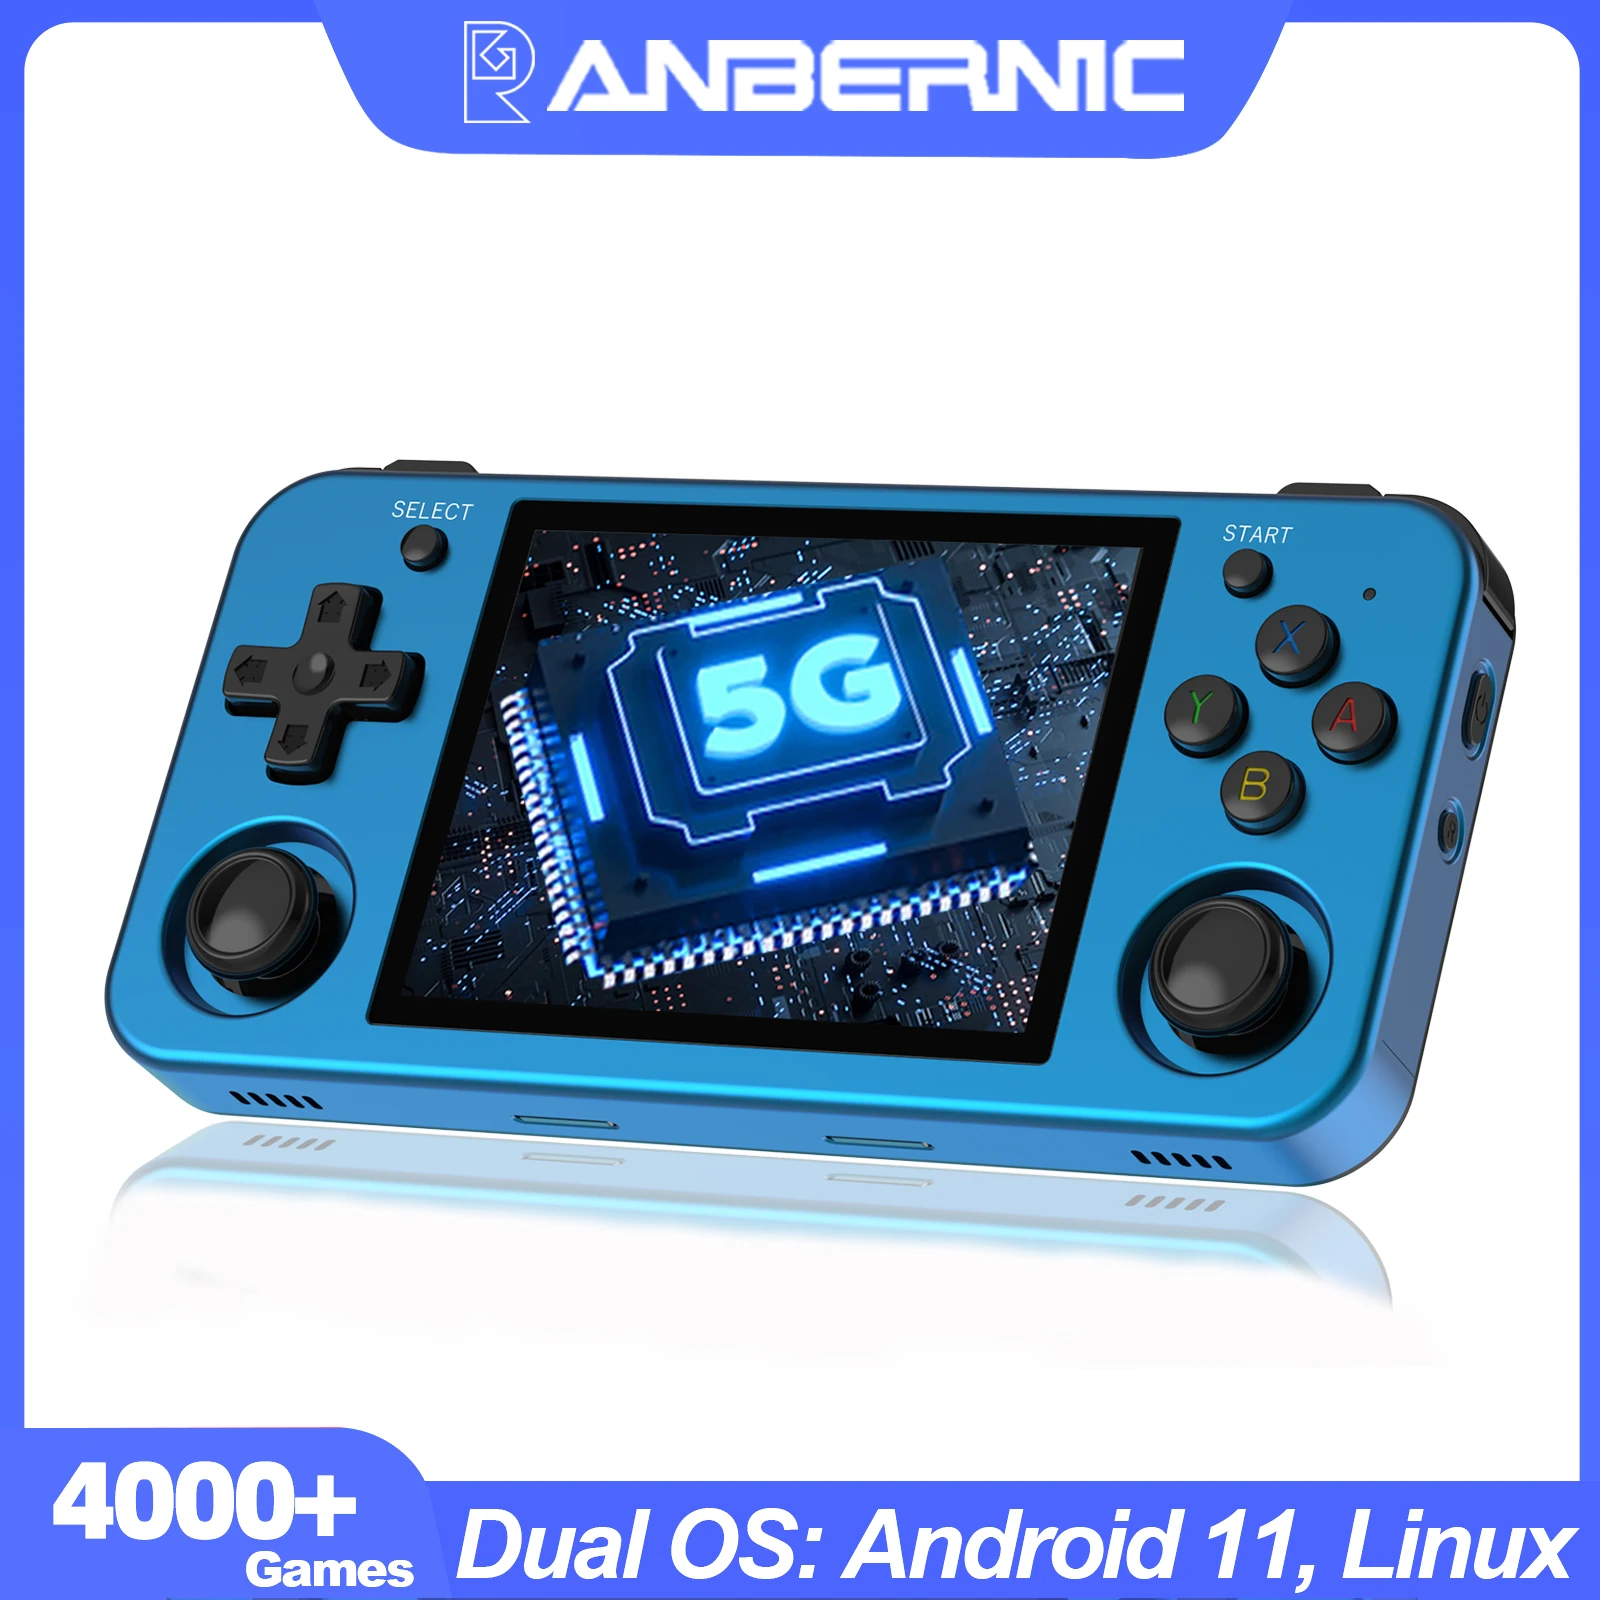 ANBERNIC RG353M RG353P Handheld Game Console 3.5-inch IPS Touch Screen RK3566 Chip Android 11 Linux Retro Video Player 4000+Game